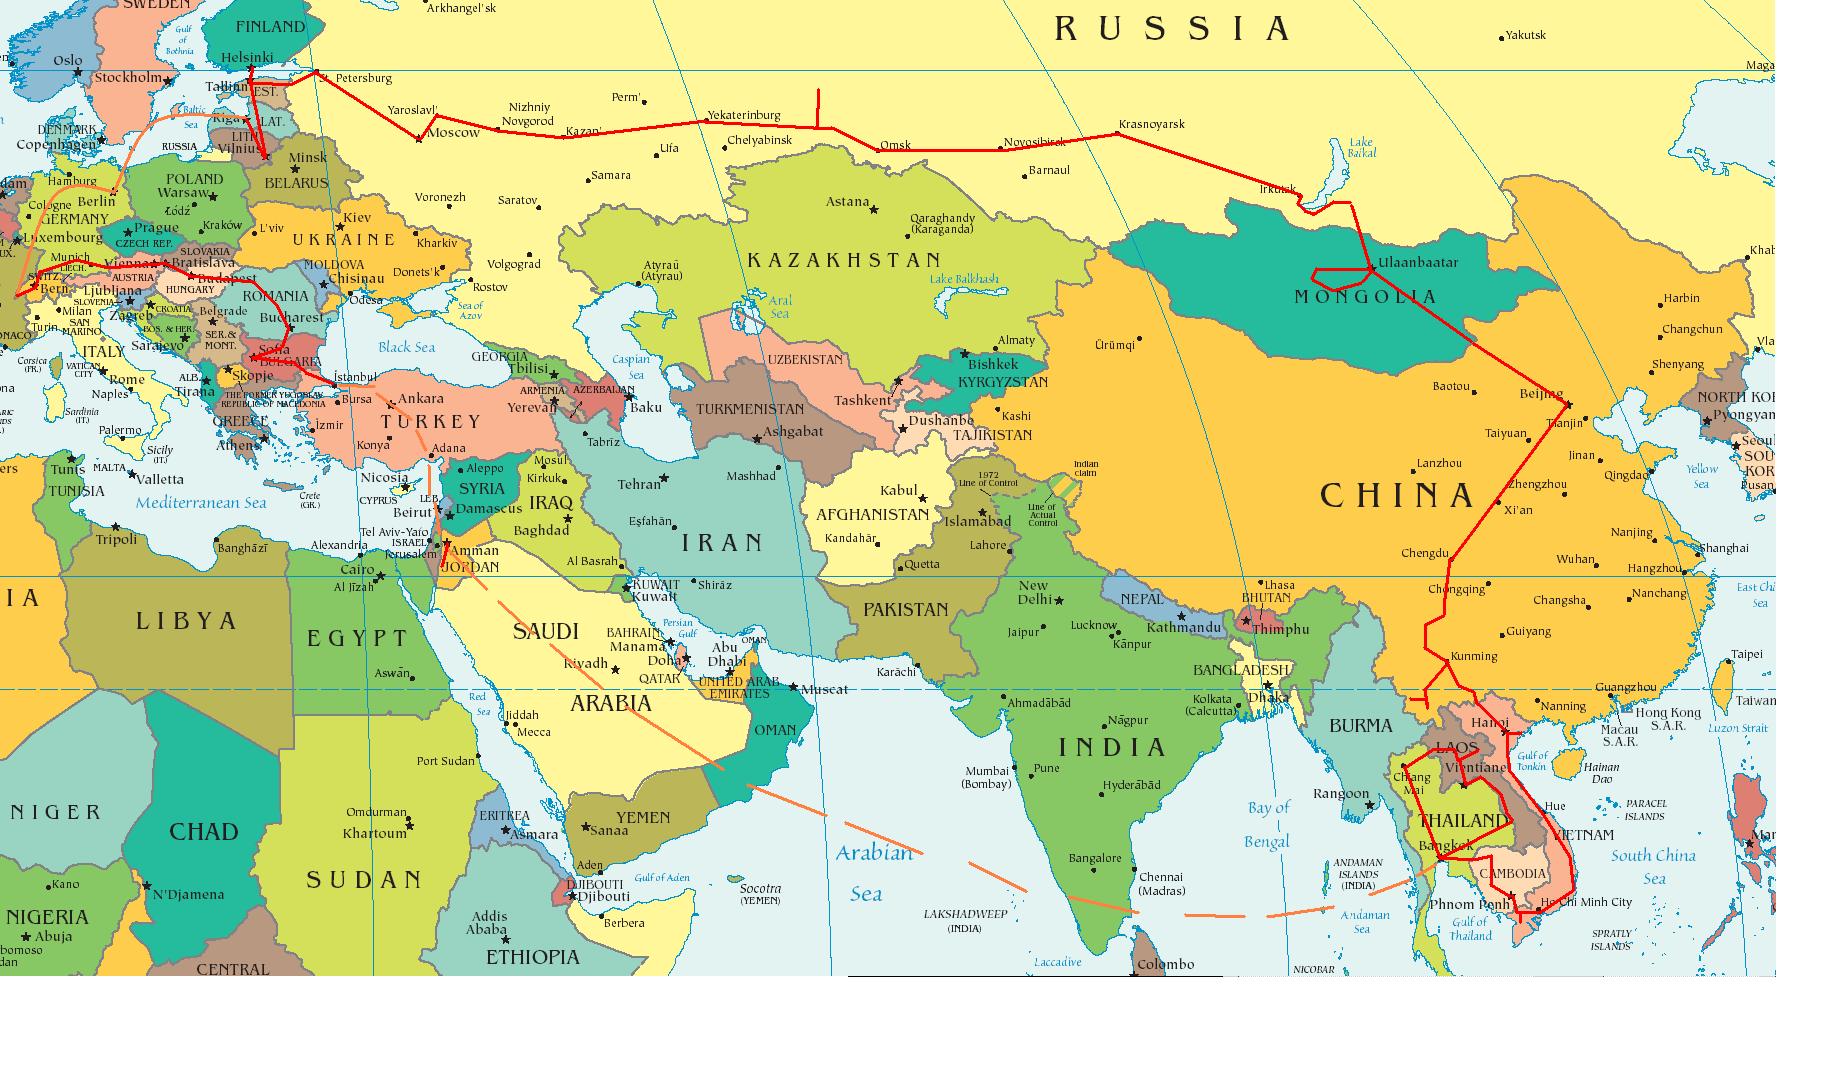 Partial Europe Middle East Asia Partial Russia Partial Africa Map • mappery